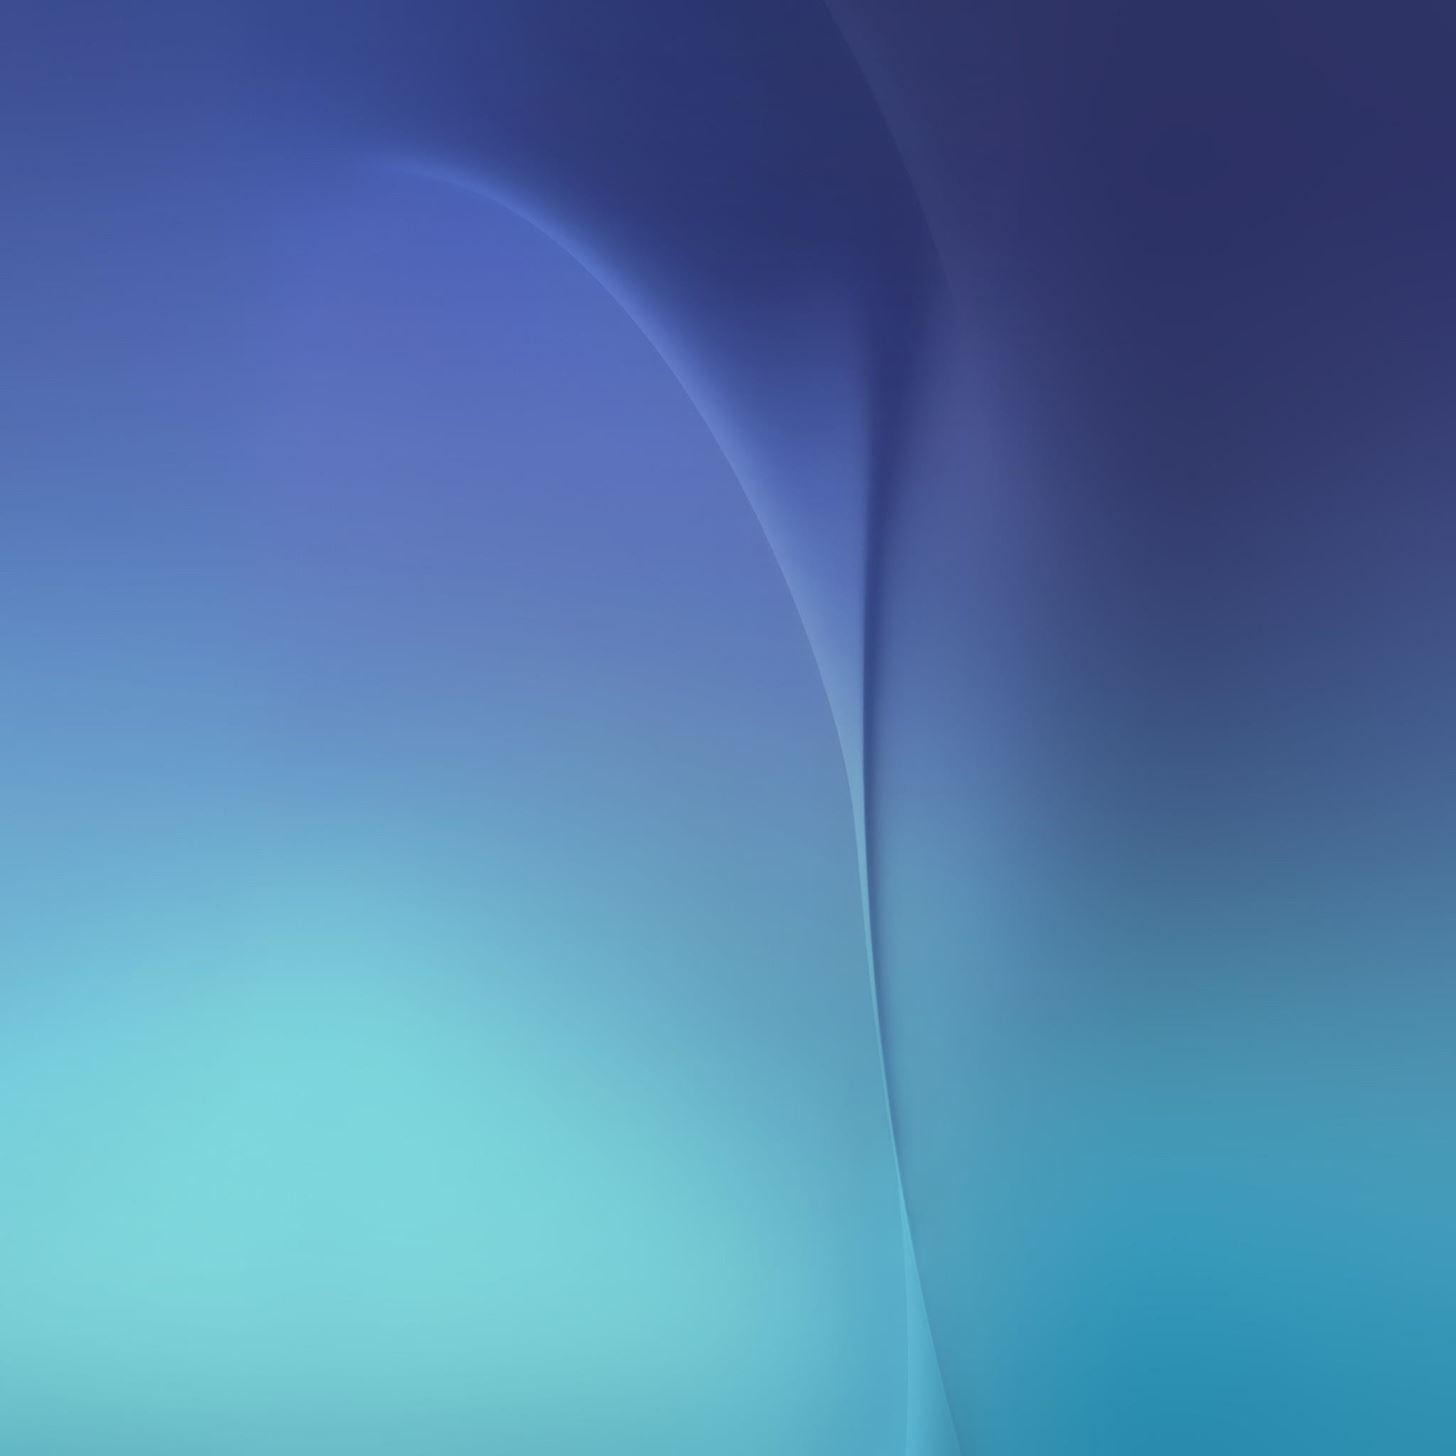 Why Wait? Get the Samsung Galaxy S6's Wallpapers Today